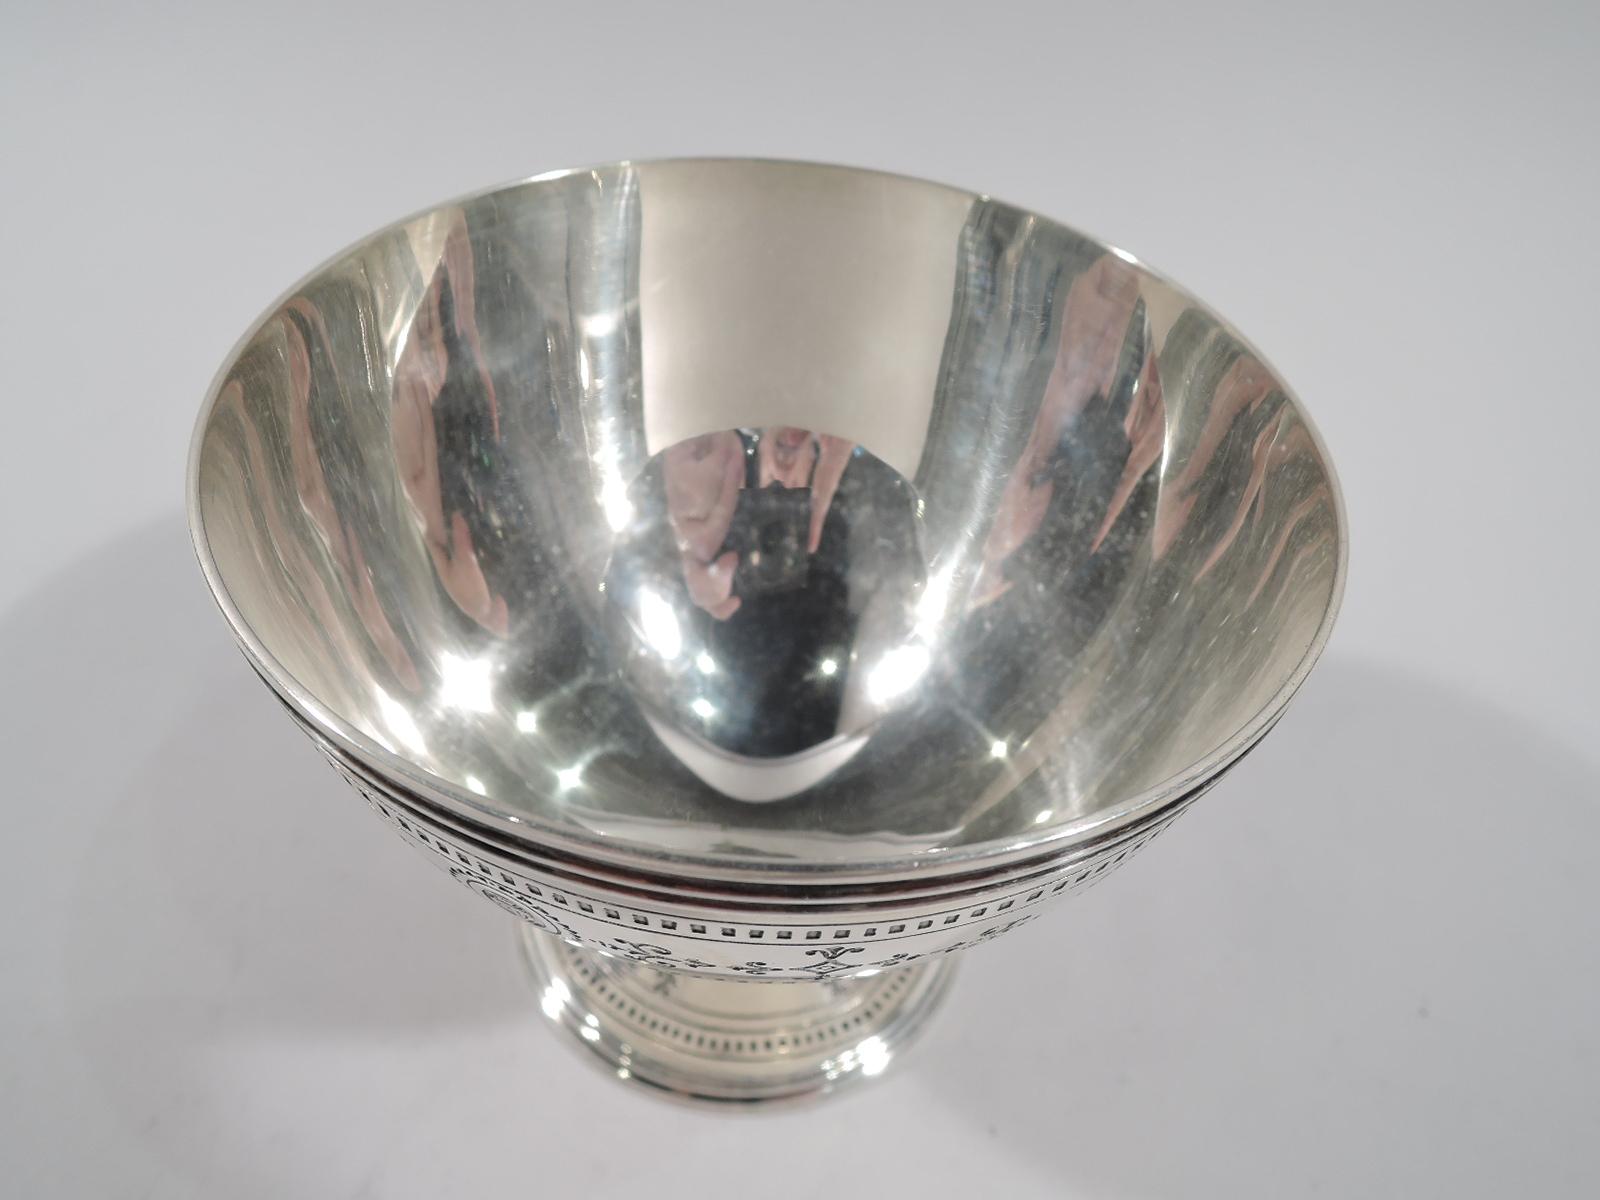 Neoclassical sterling silver sugar bowl. Made by Tiffany & Co. in New York. Curved and tapering sides with reeded rim and stepped and raised foot. Engraved and acid-etched band with urn-inset oval wreathes between dentil borders. Fully marked